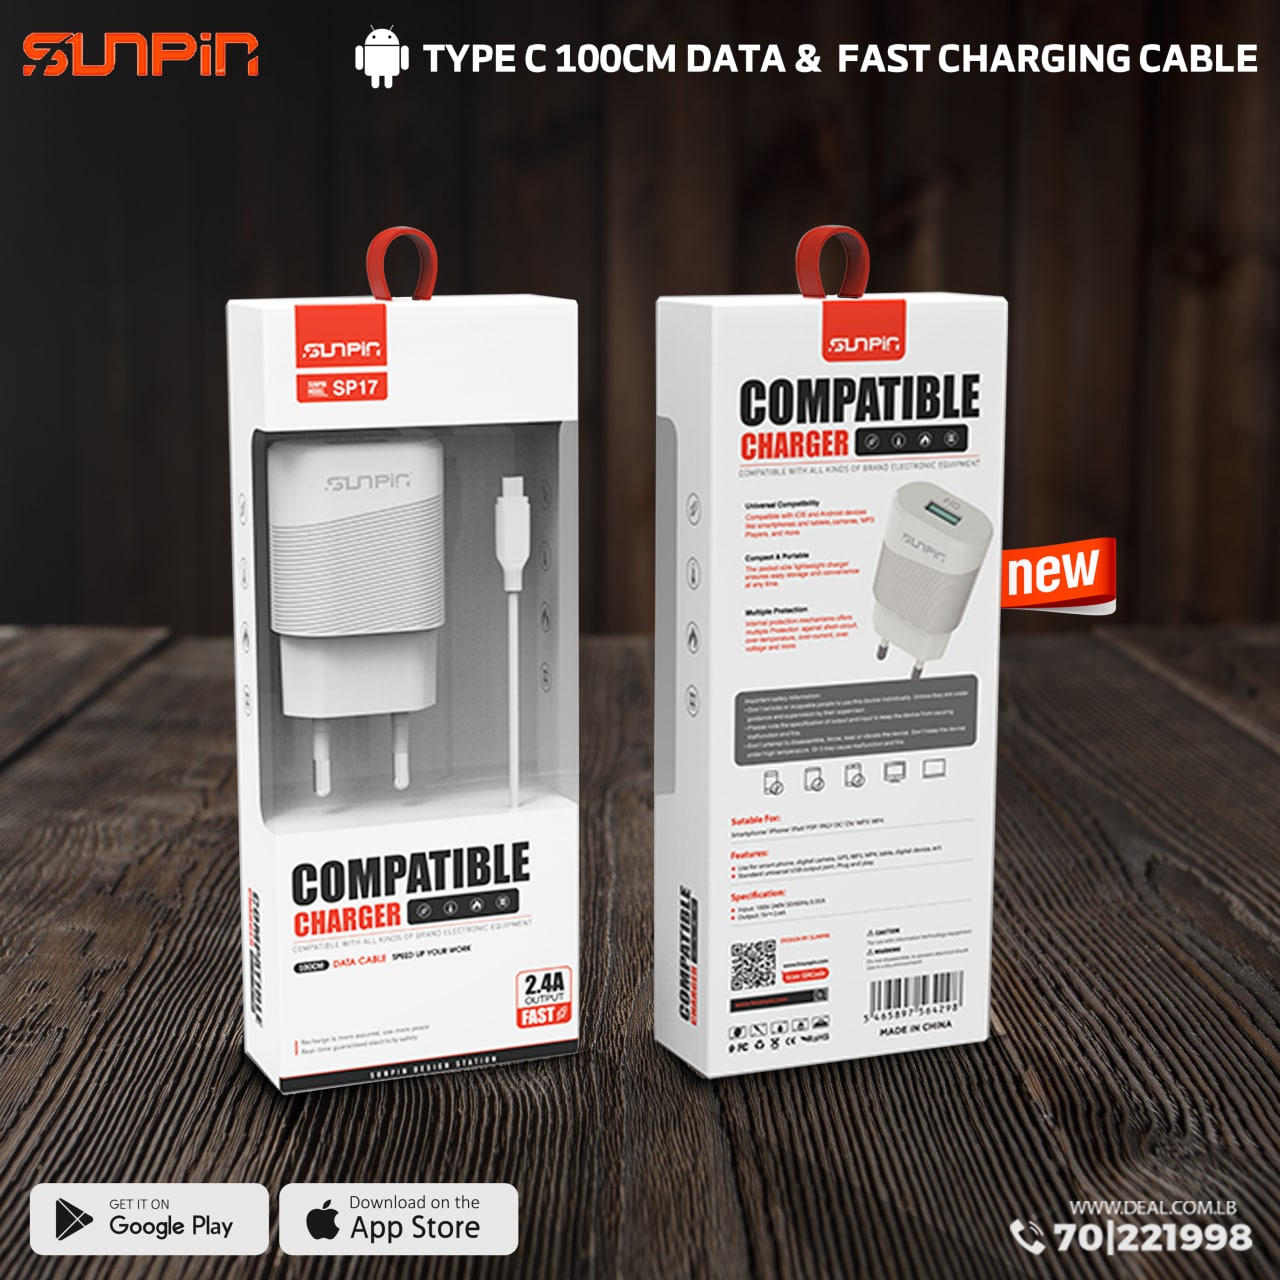 SUNPIN SP17 TYPE C 100CM DATA &  FAST CHARGING CABLE